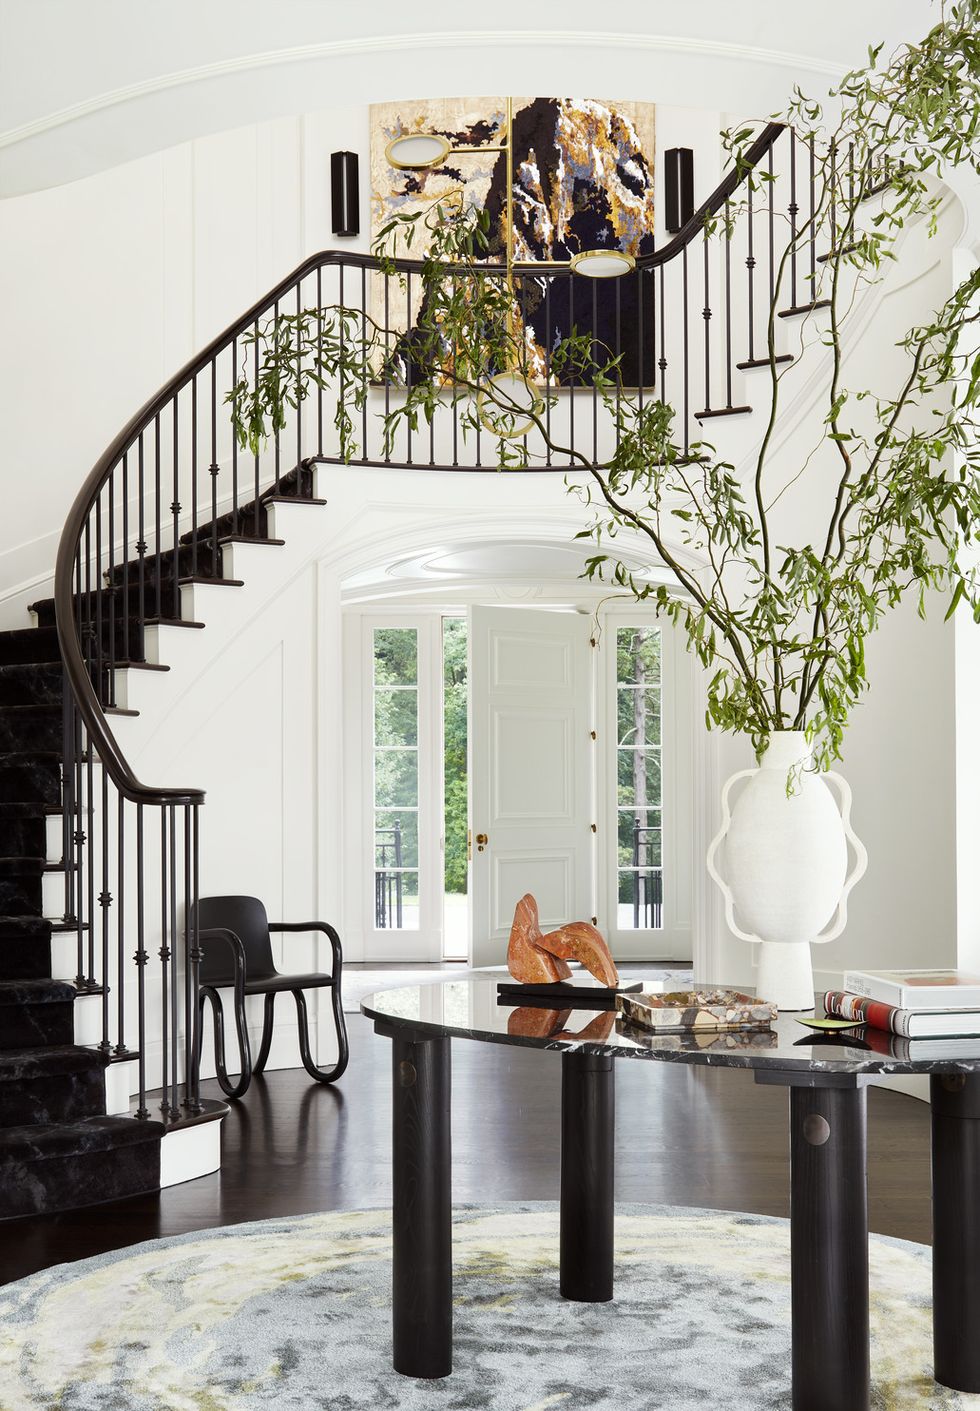 westchester county, new york home designed by lucy harris